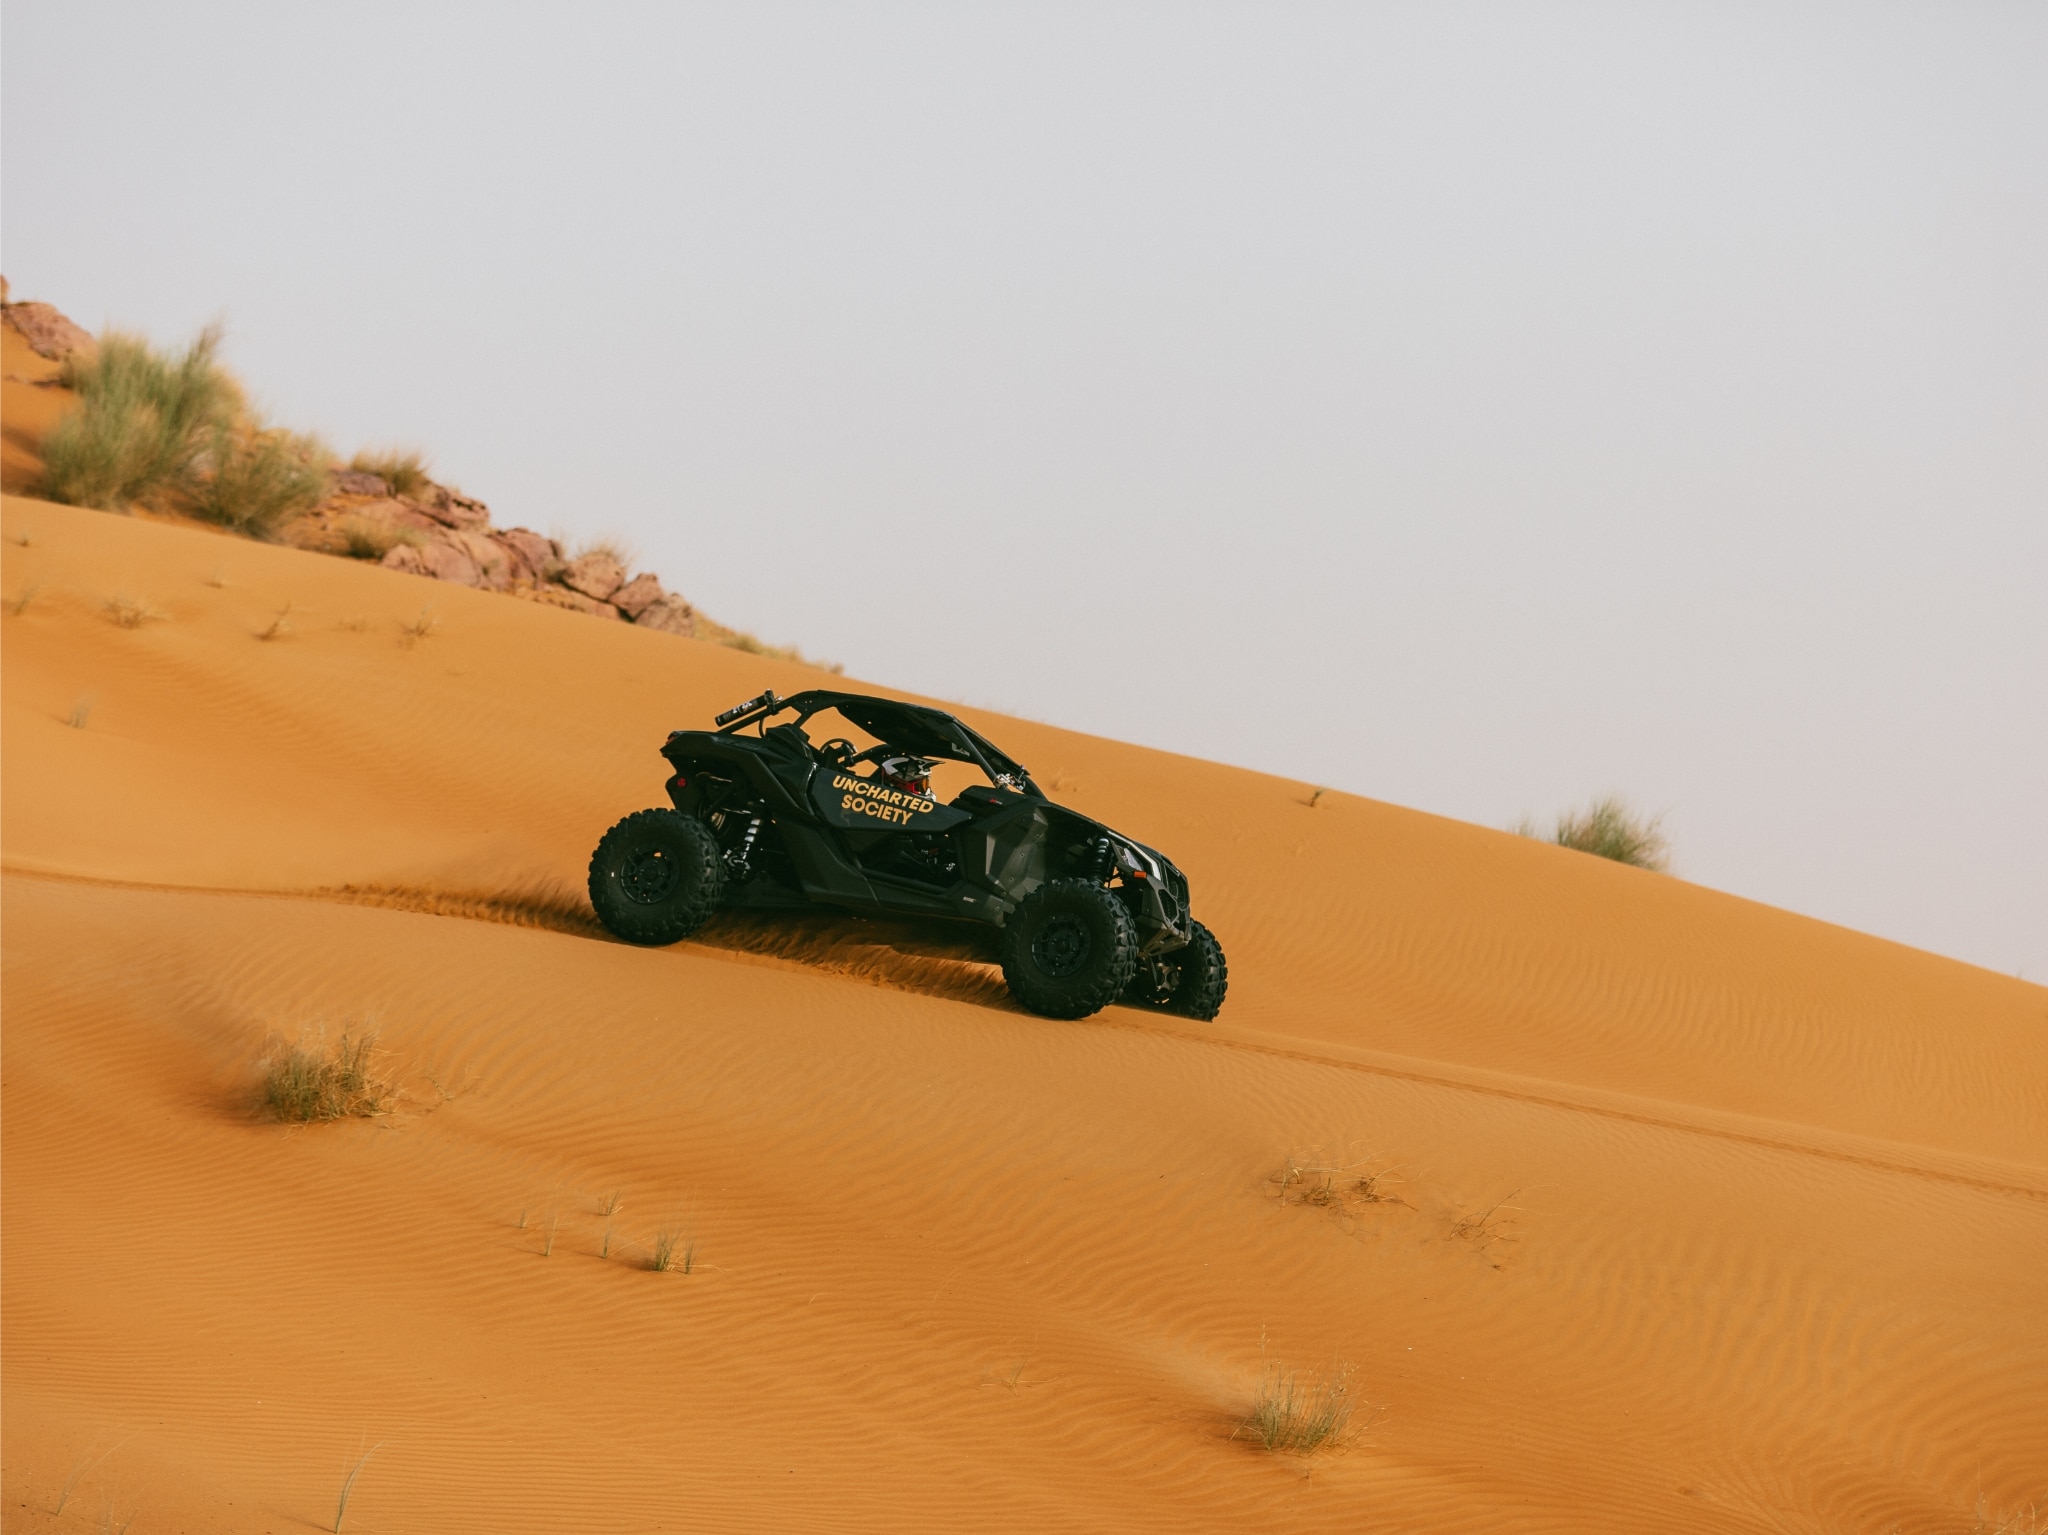 Enjoy the thrills of sand dune riding and dinner under the stars in Dubai, UAE